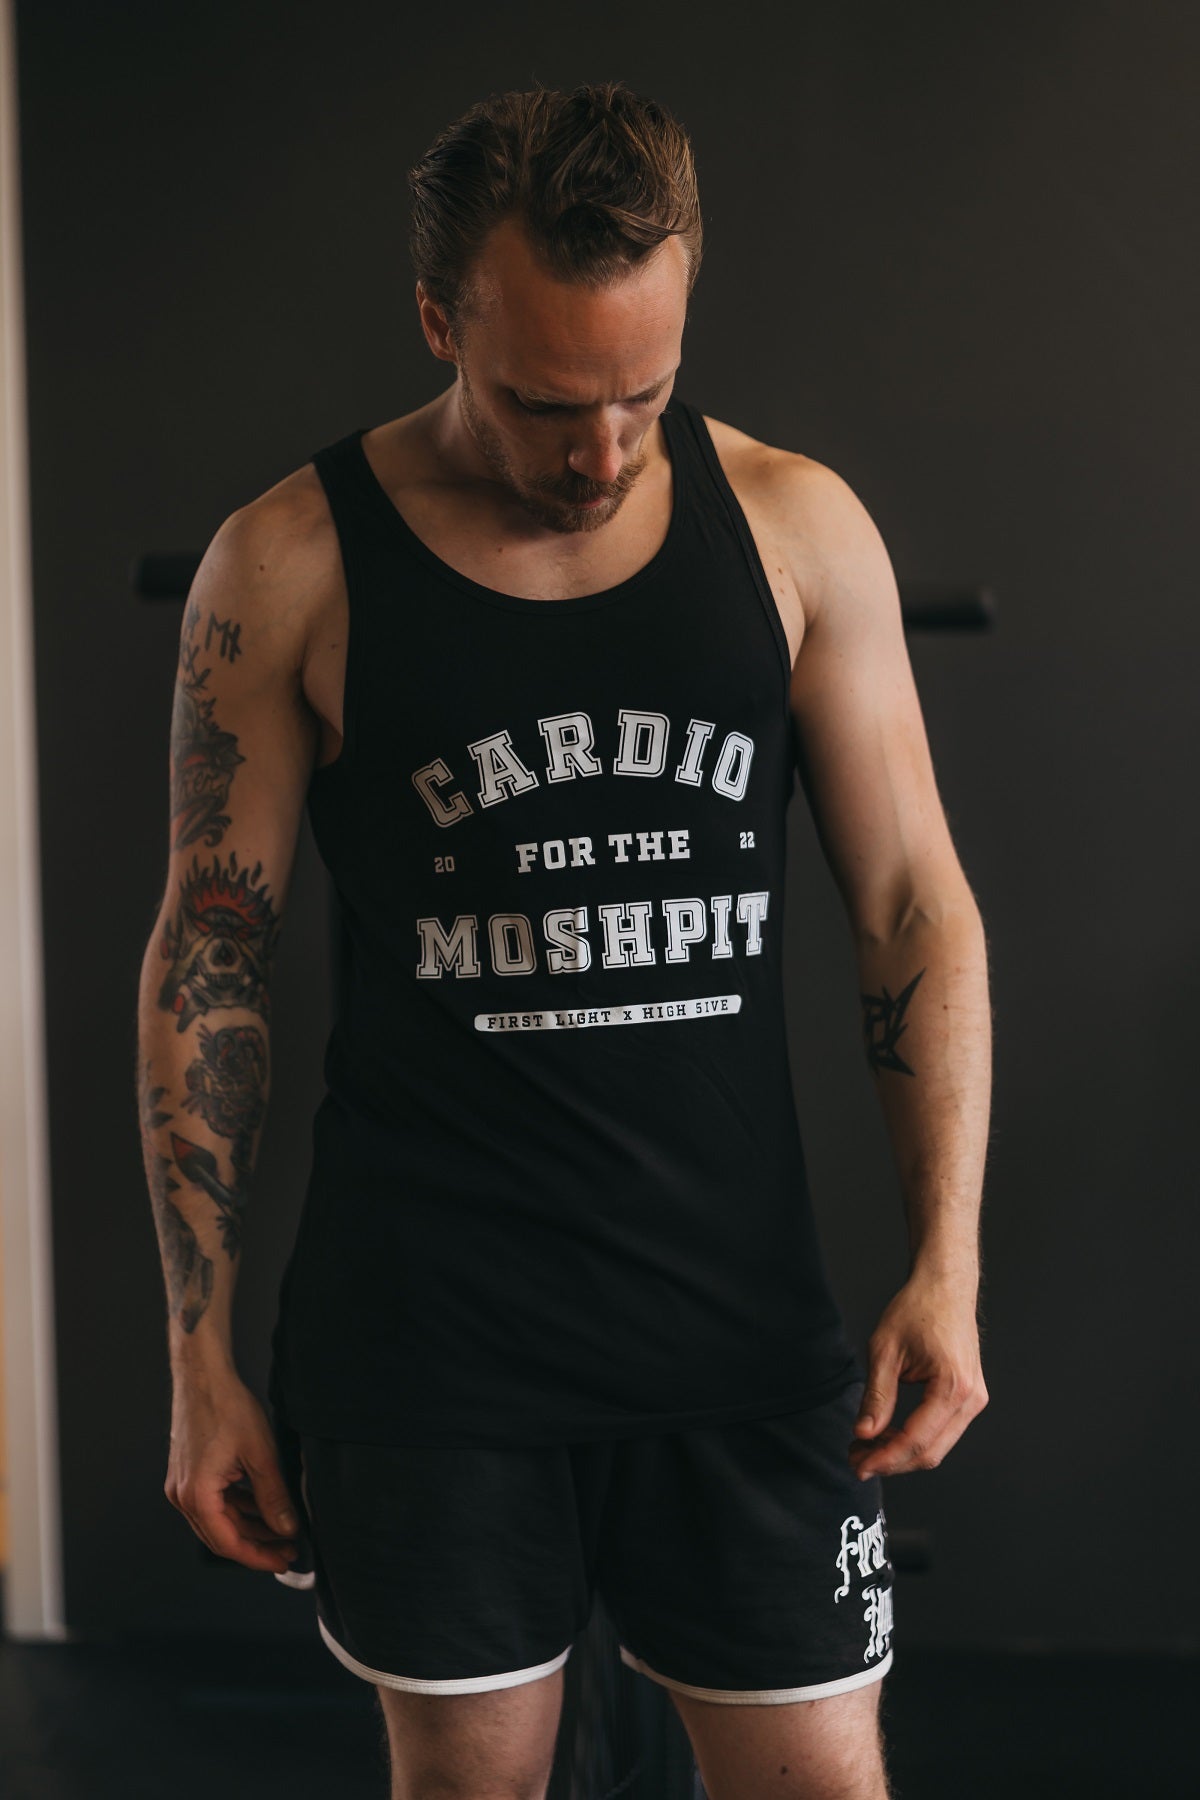 "Cardio for the Moshpit" Tanktop